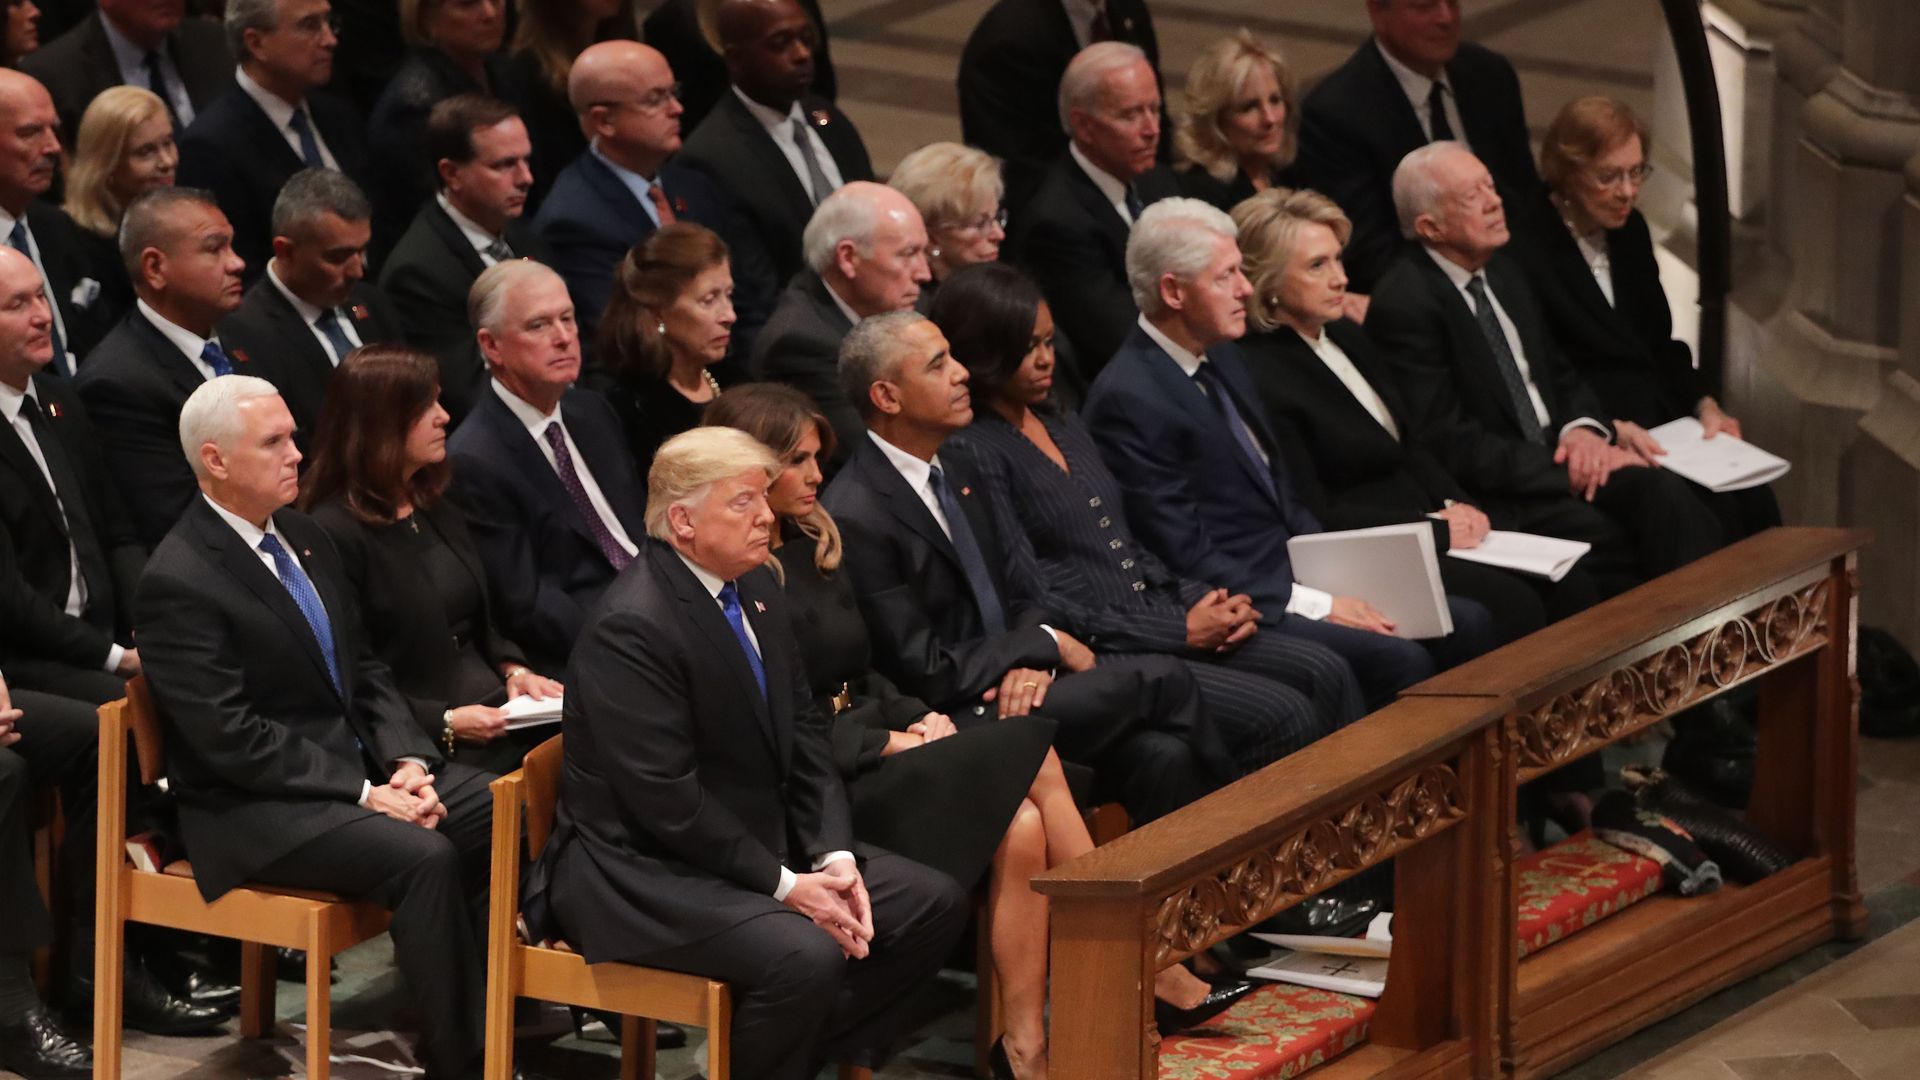 Former presidents sitting in the front row of George H.W. Bush's funeral.